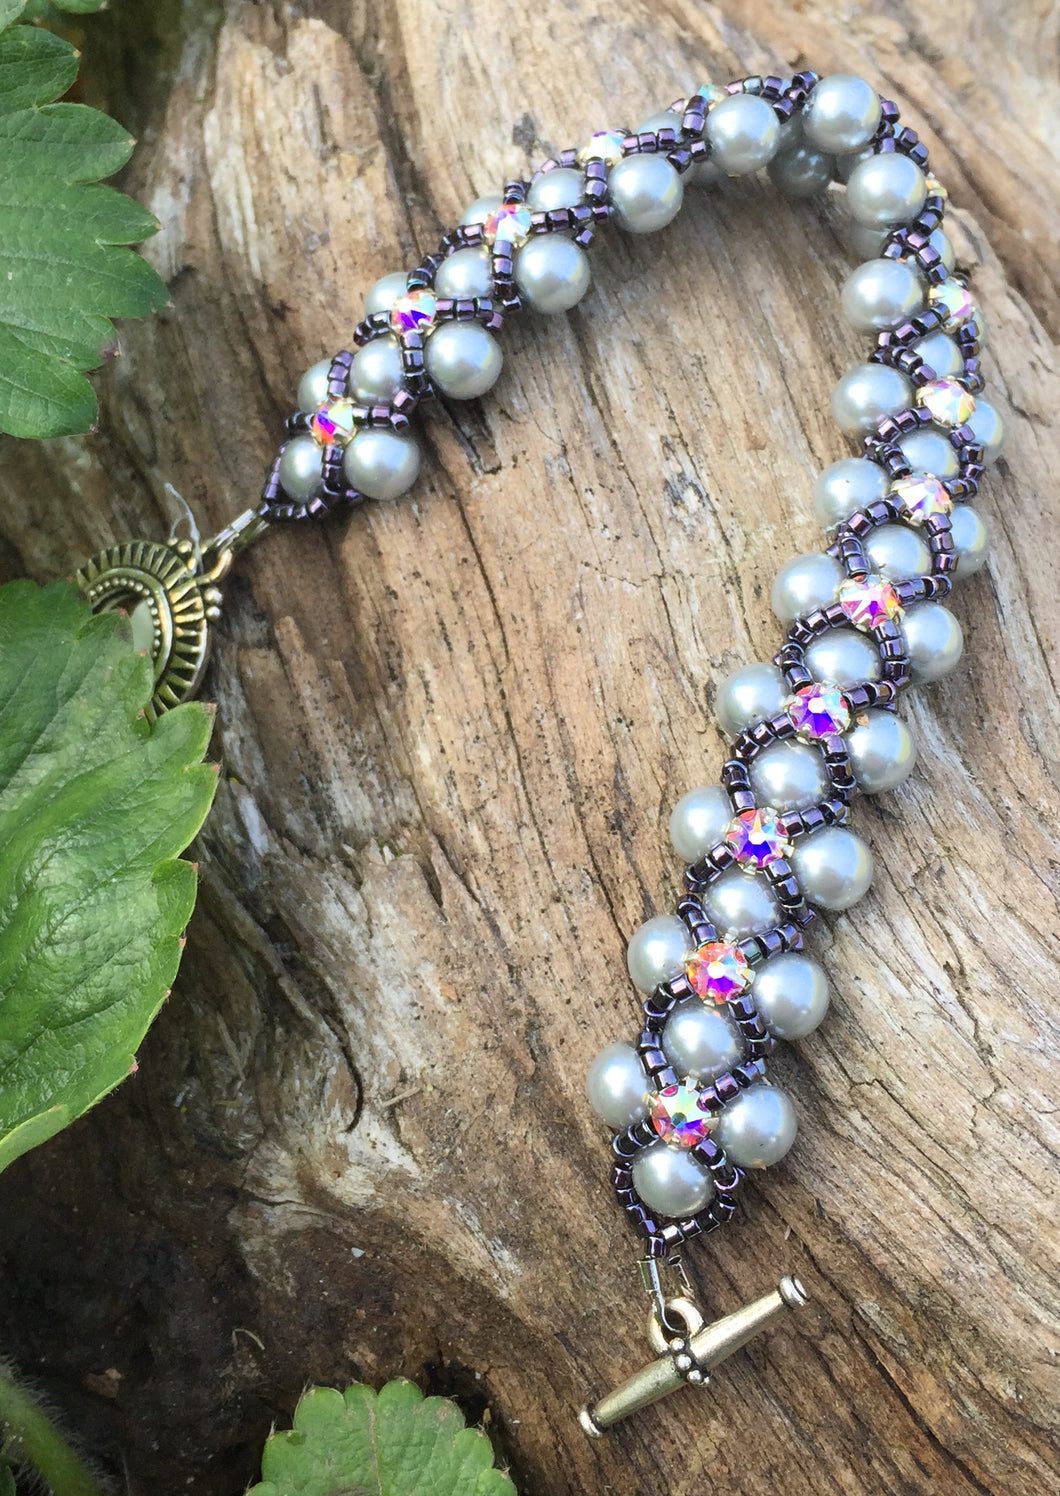 This Silver glass pearl and Dark Purple Delica Seed Bead bracelet is topped with Swarovki Crystal Montees and measures 7 1/4